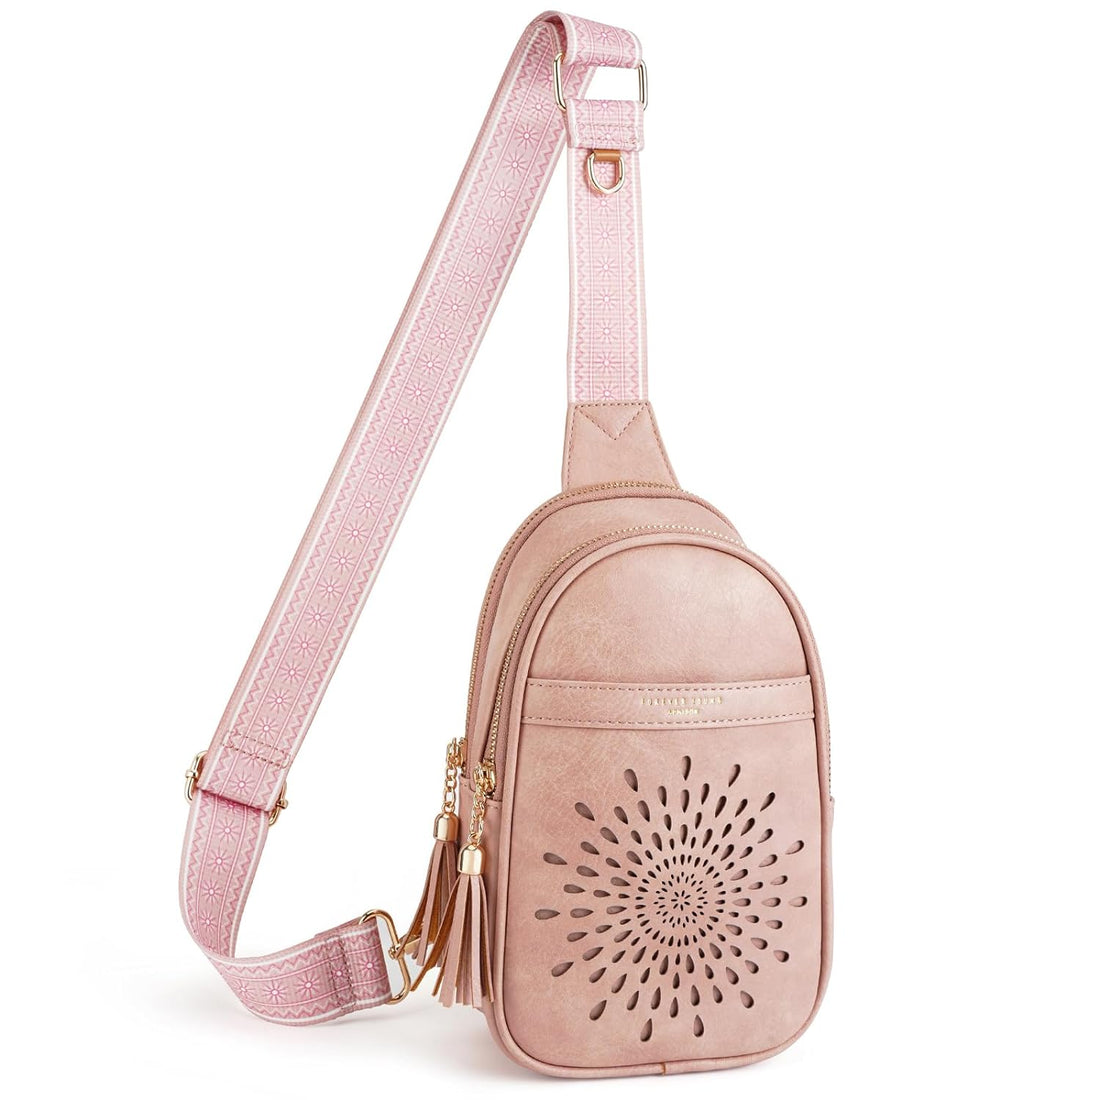 APHISON Small Sling Bag Fanny Packs Cell Phone Purse Vegan Leather Crossbody Bags for Women Chest Bag with Adjustable Strap, 08-pink, Fashion